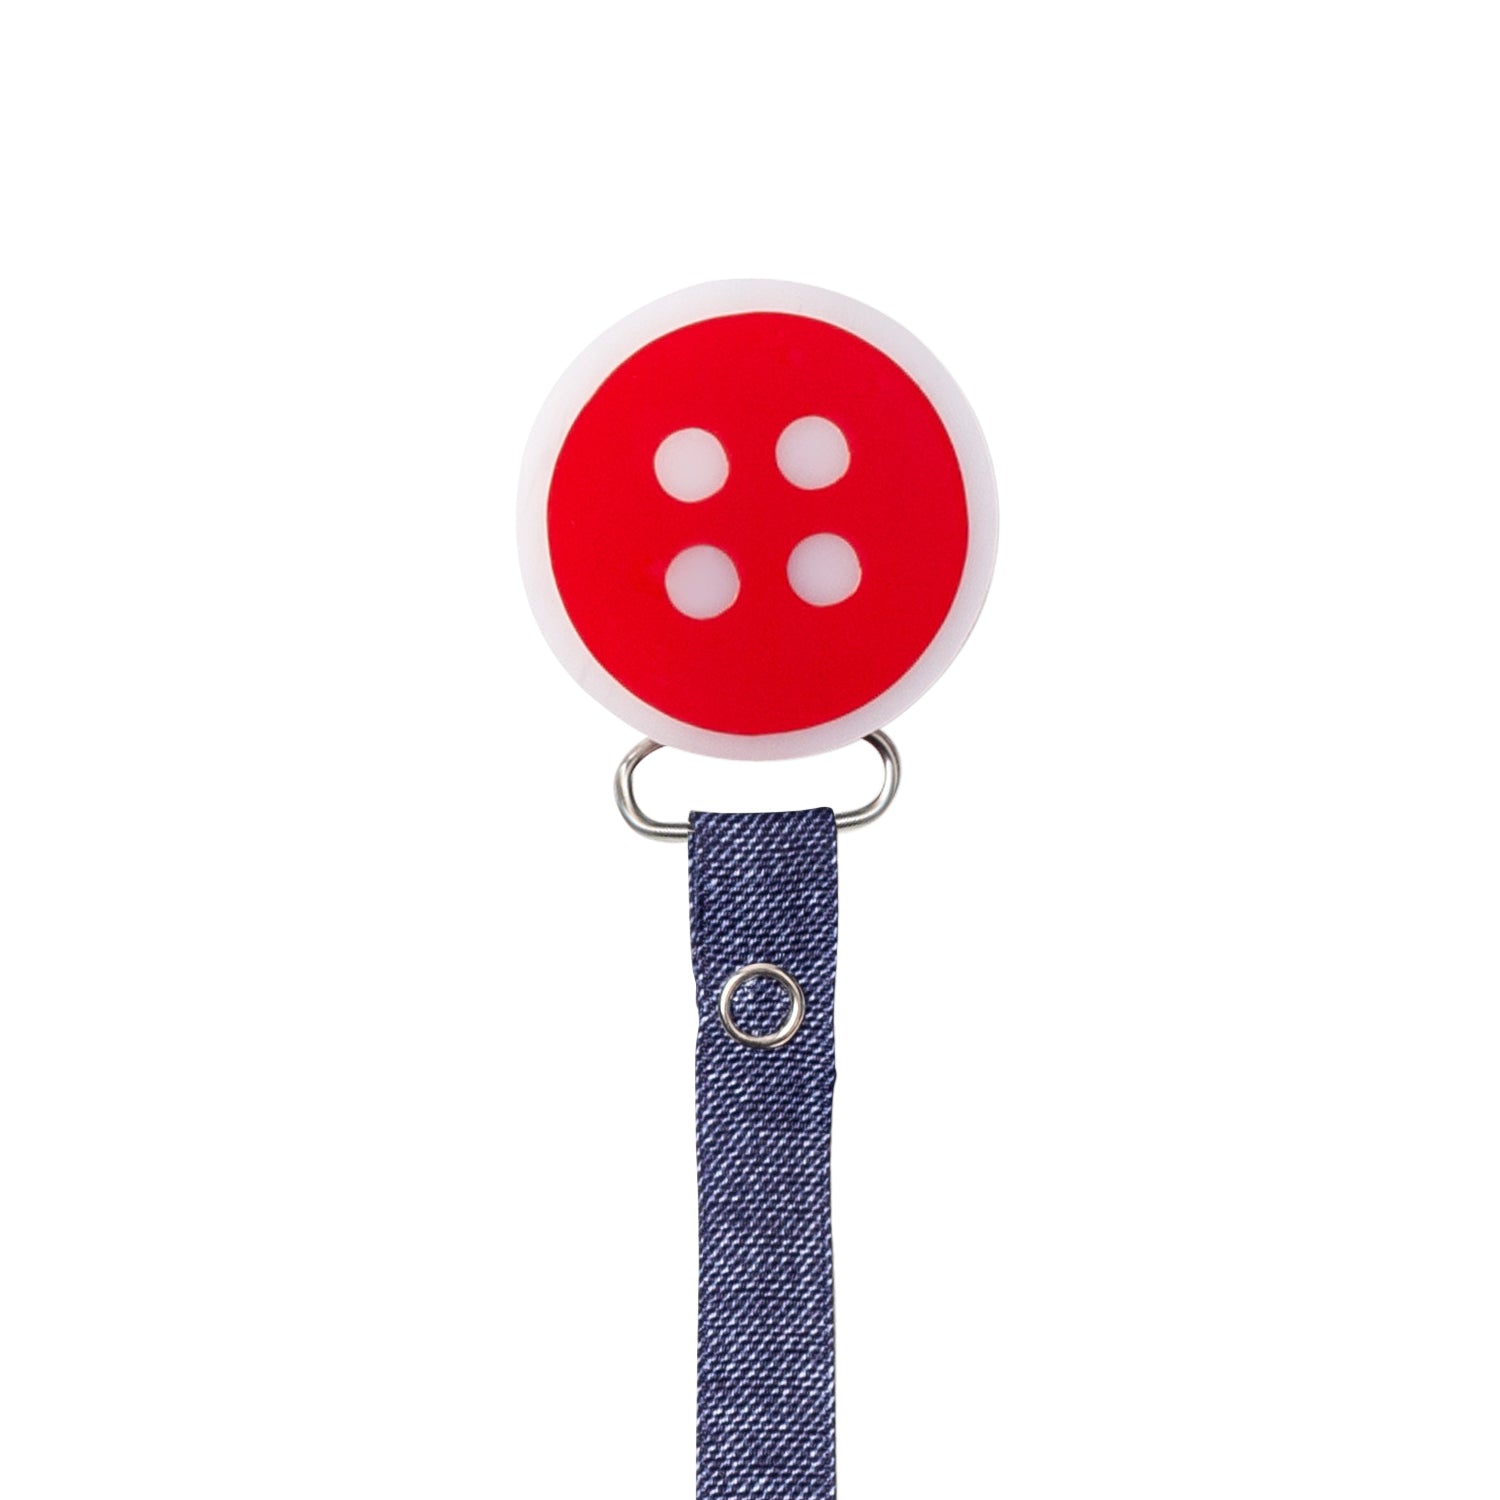 Classy Paci fun "cute as a button" Red big bright. denim/black for baby toddler girls or boys  pacifier clip